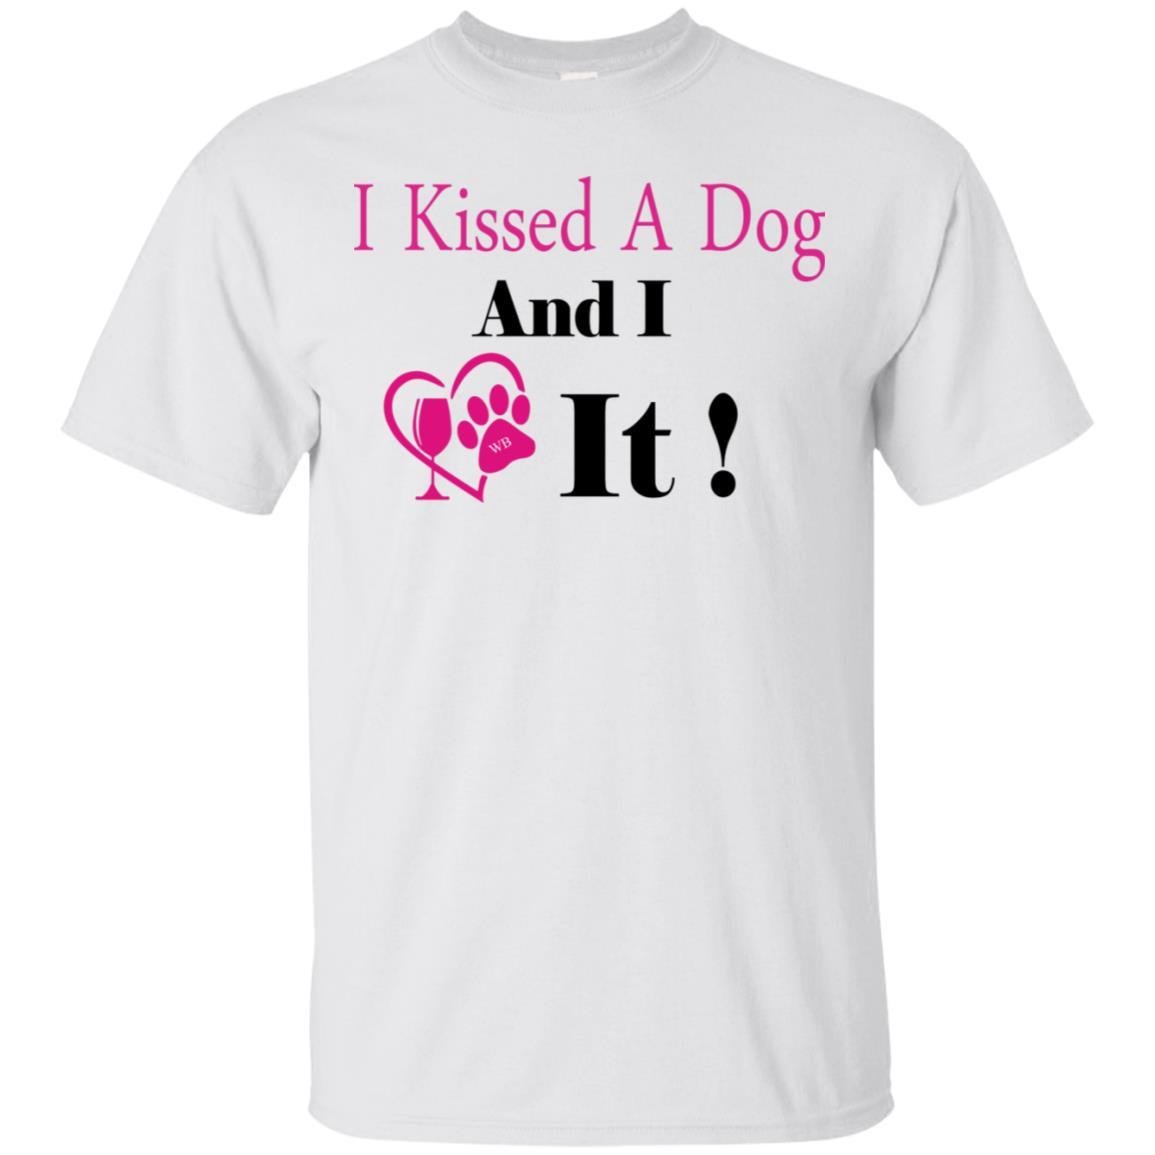 T-Shirts White / S WineyBitches.co "I Kissed A Dog And I Loved It:" Ultra Cotton T-Shirt WineyBitchesCo